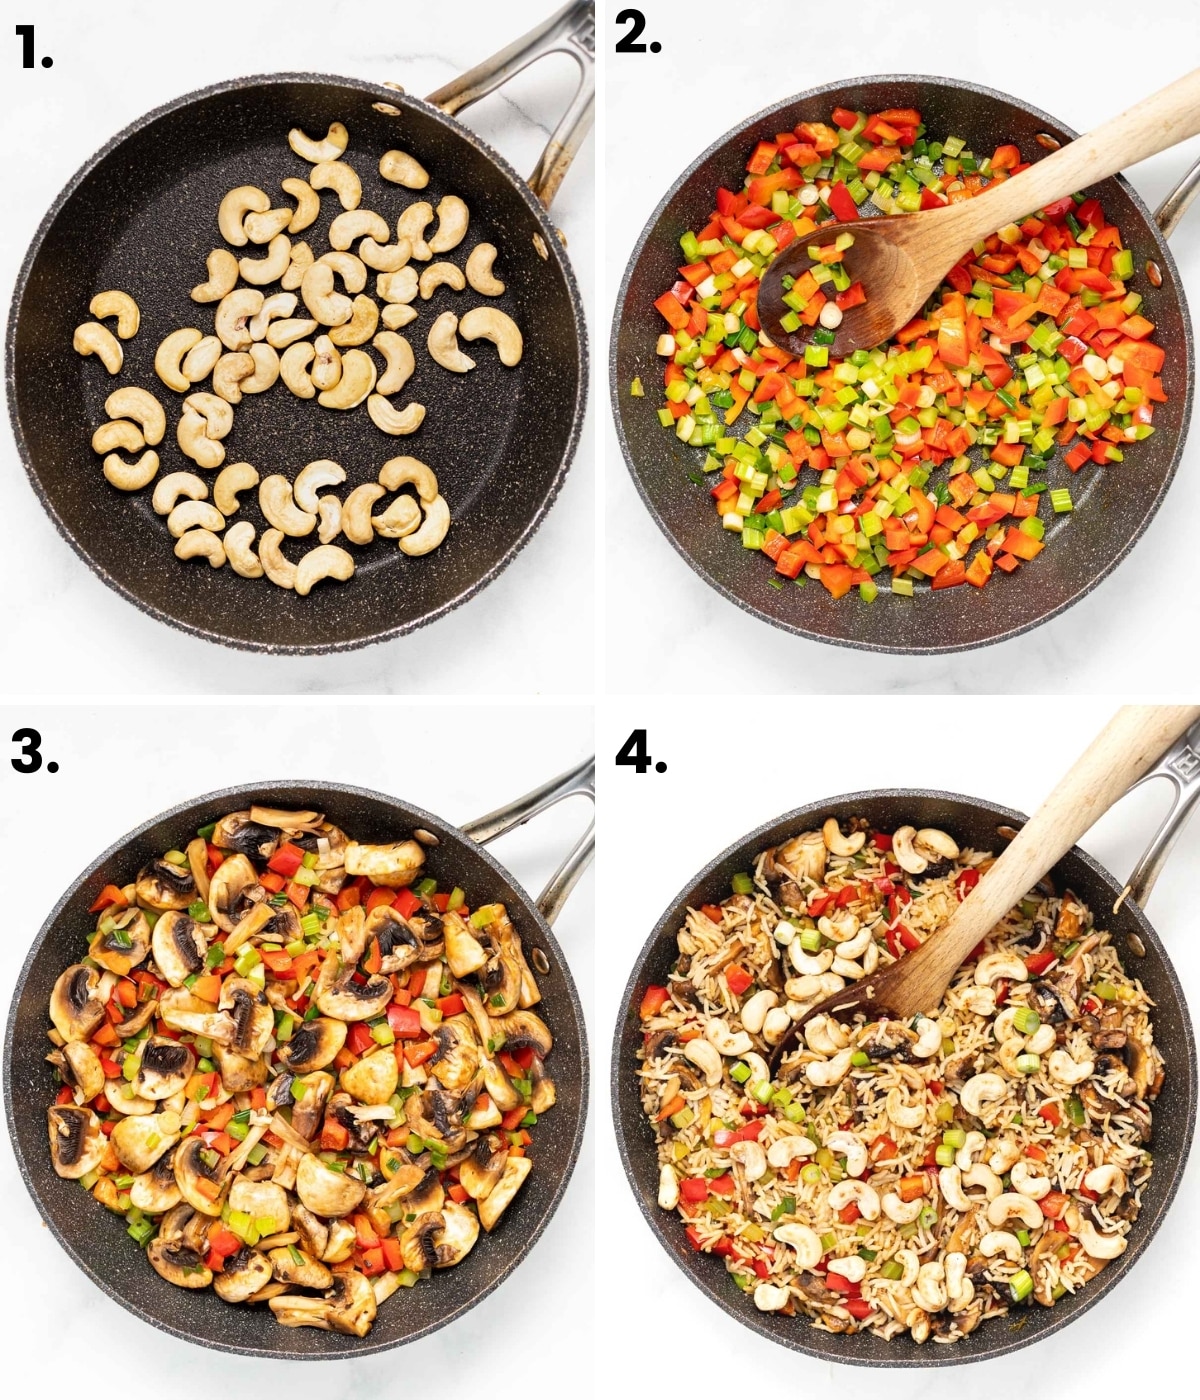 how to make mushroom fried rice in pictures as per the written instructions